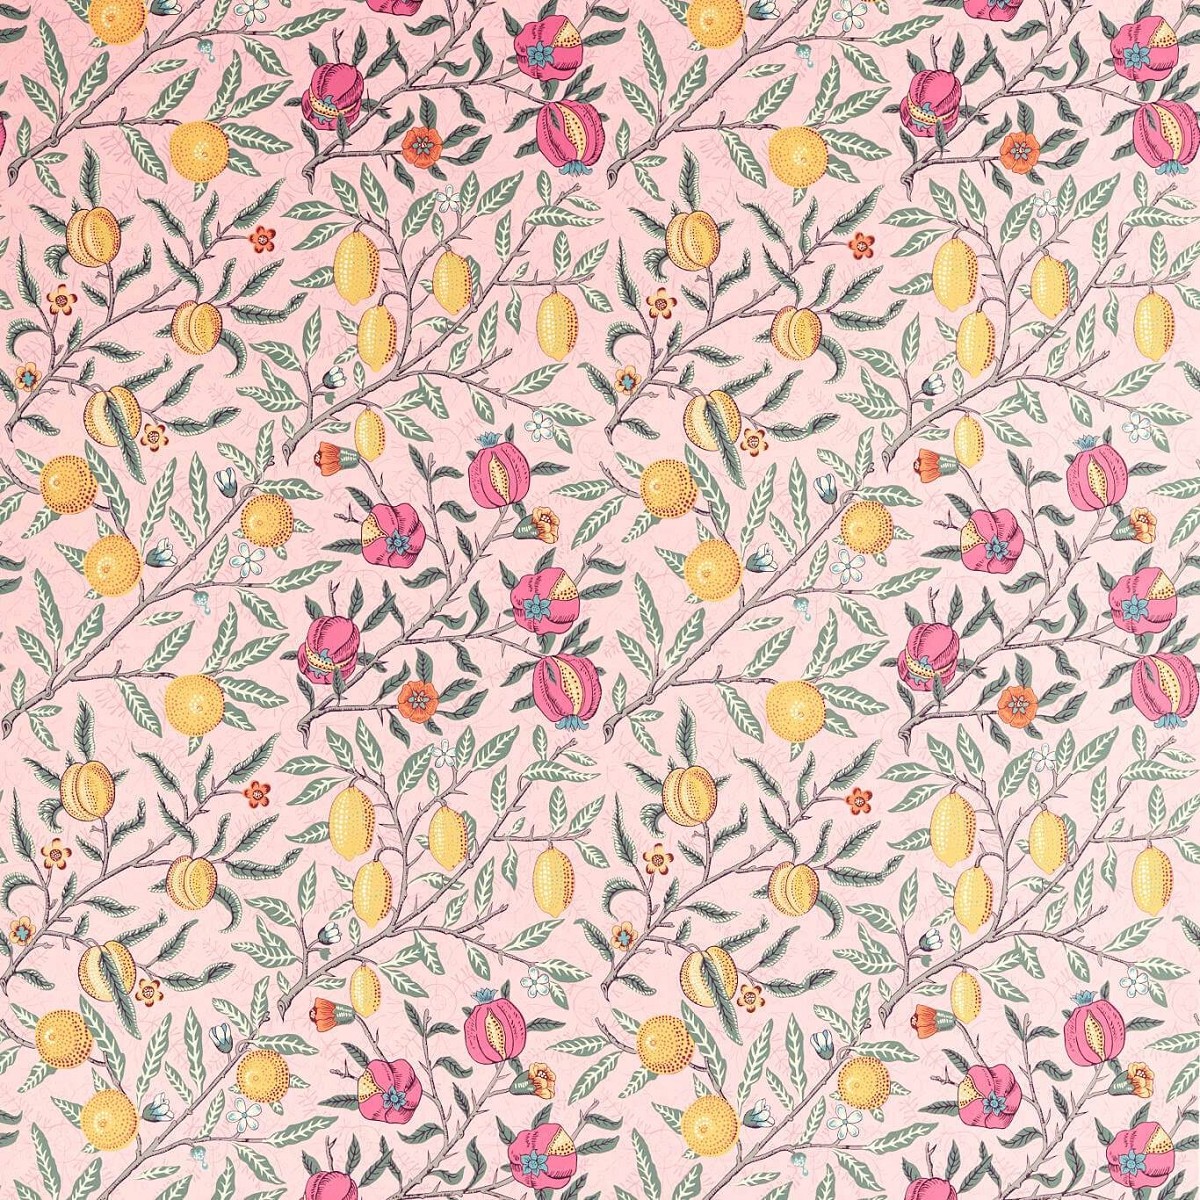 Fruit Stardust Fabric by William Morris & Co.